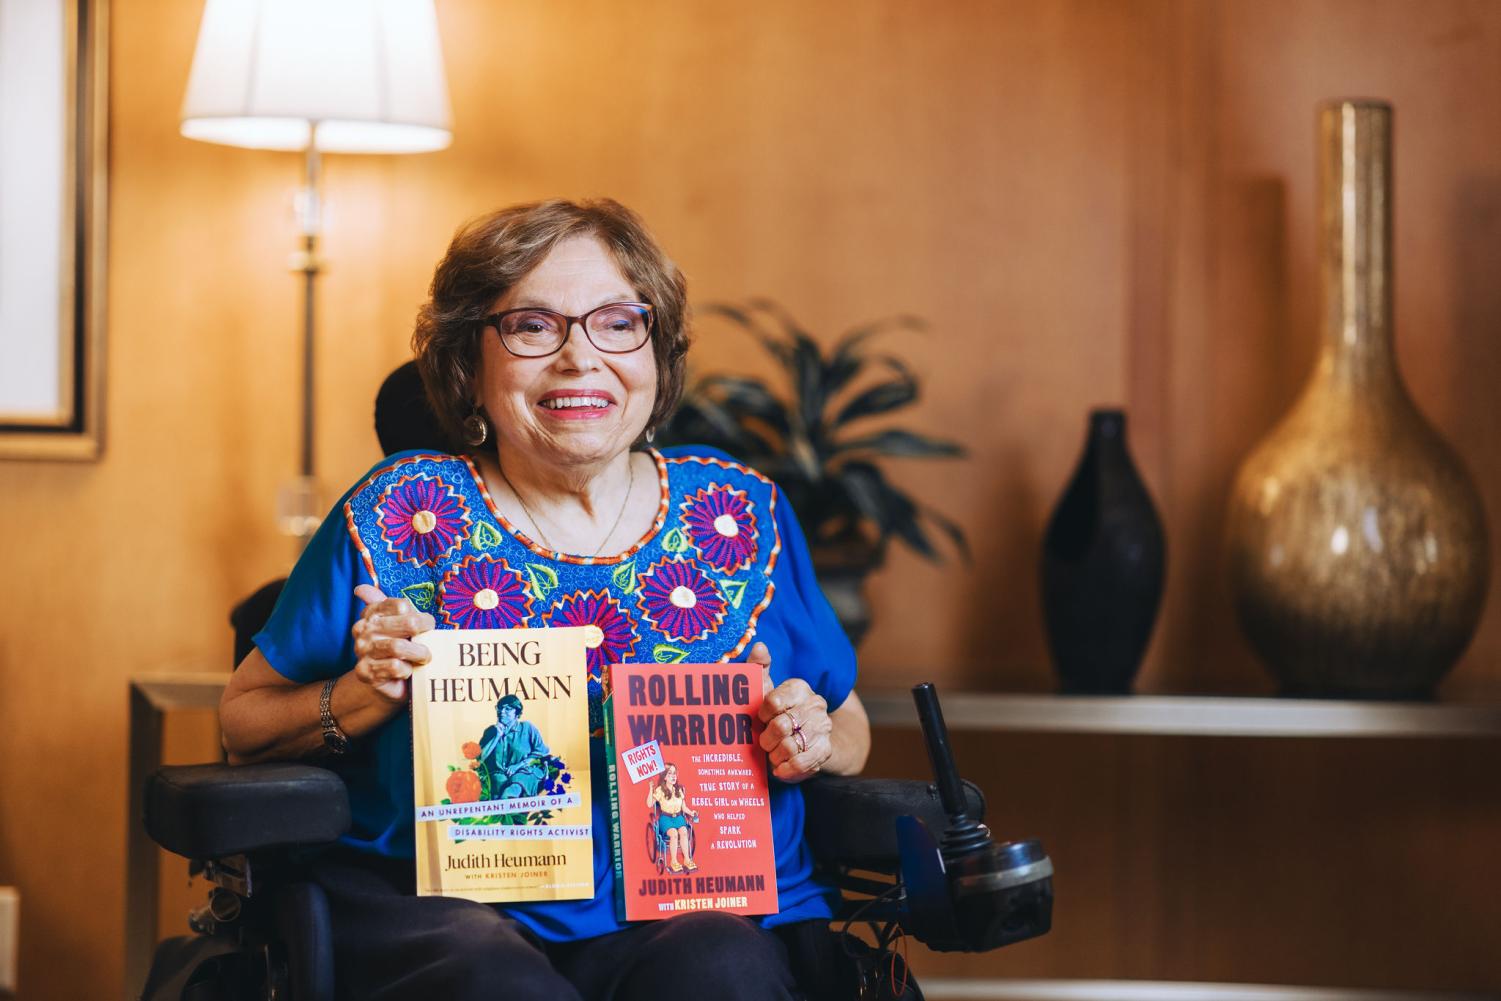 Judith Heumann sits in a warmly lit room holding up two of her books, "Being Heumann" and "Rolling Warrior." She is wearing a blue top with floral embroidery. In the background, two vases sit on a shelf and a lamp can be seen.